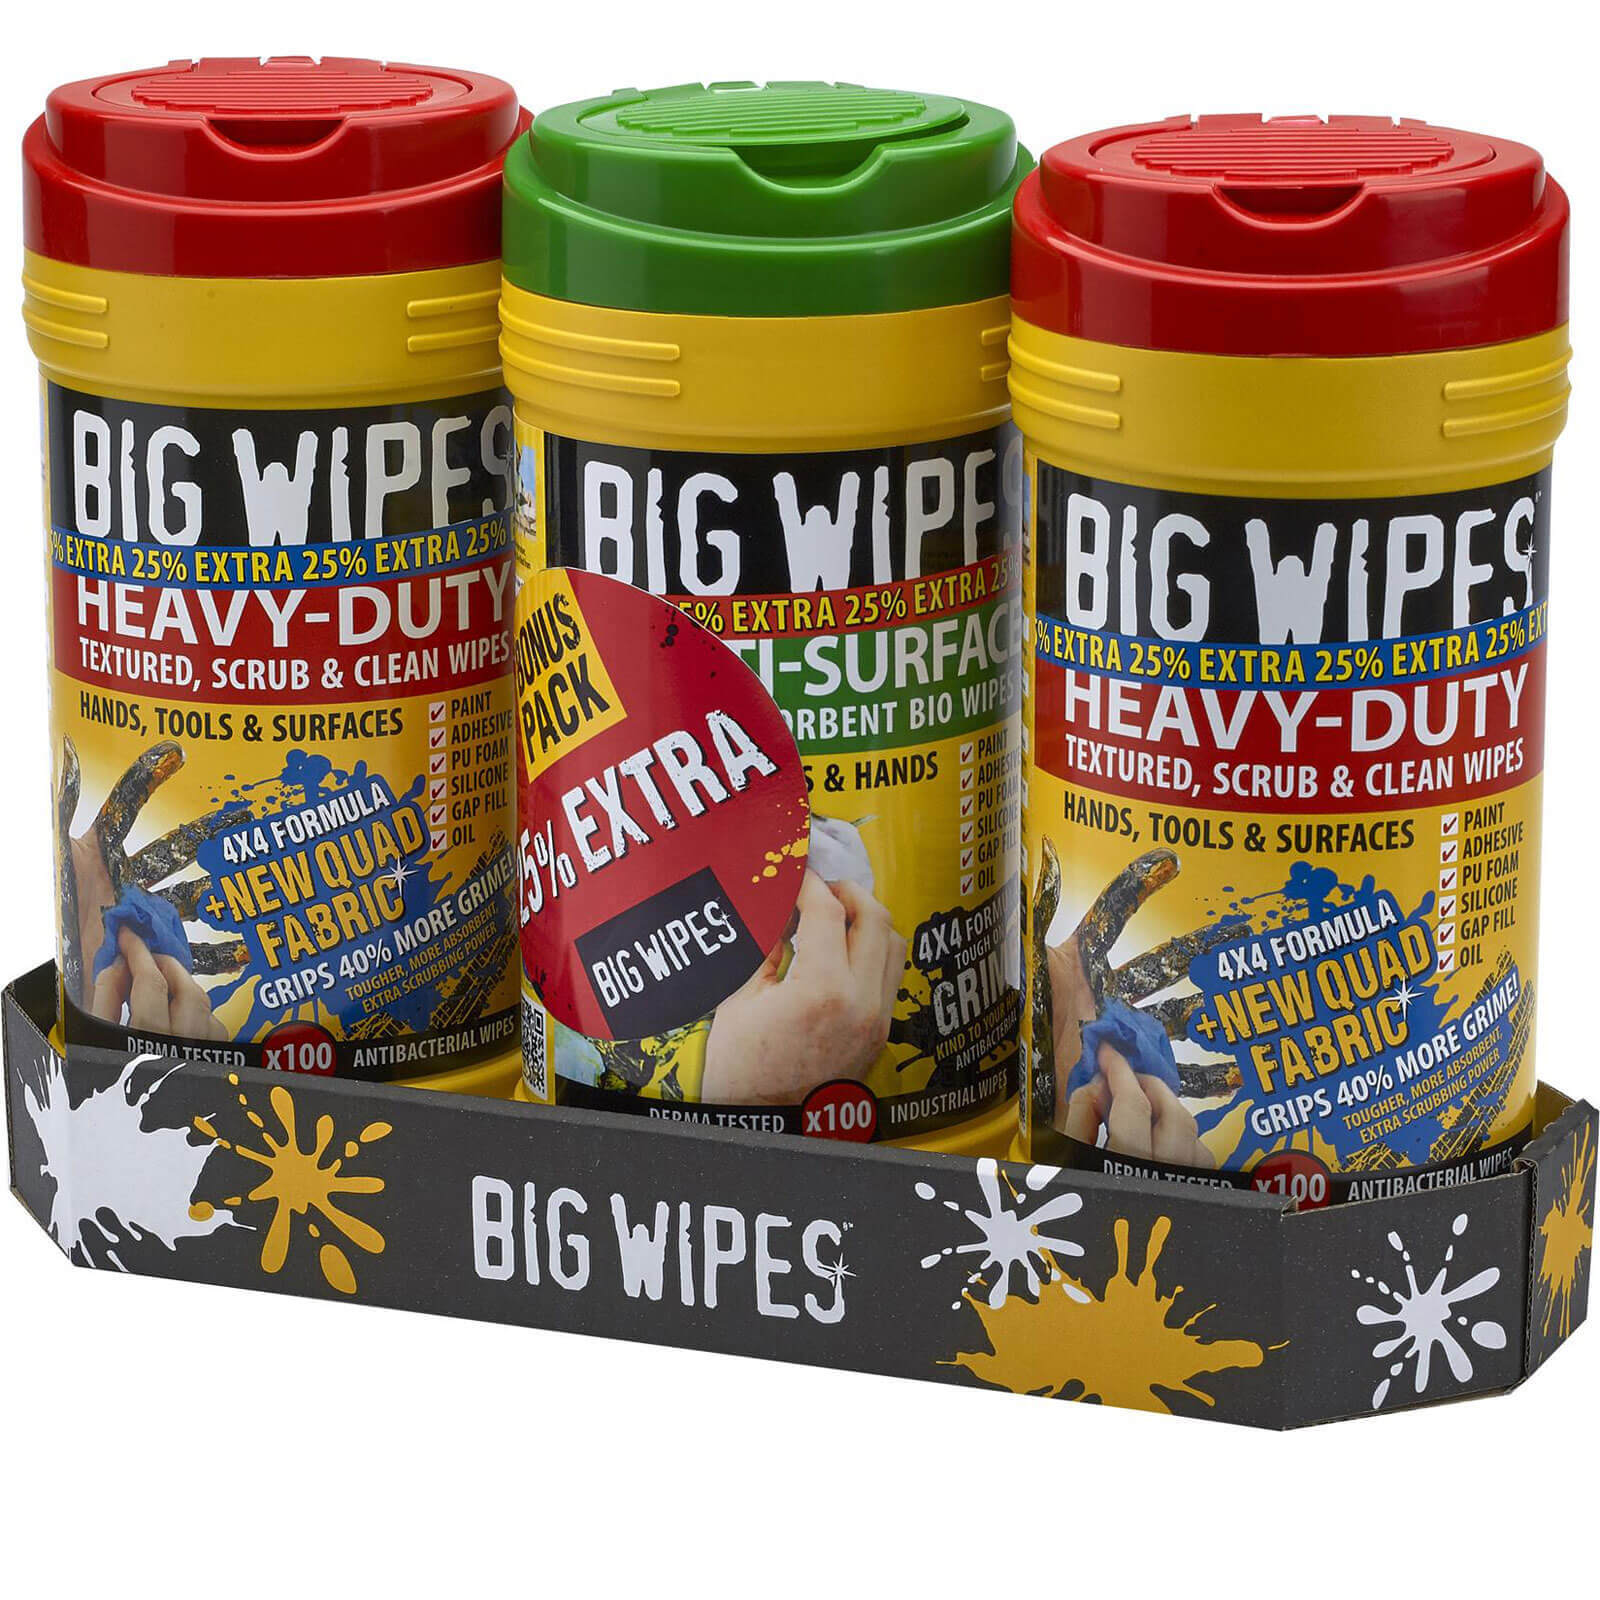 Image of Big Wipes 3 Pack Scrub and Clean Antibacterial Heavy Duty Hand Wipes 25% Extra Free